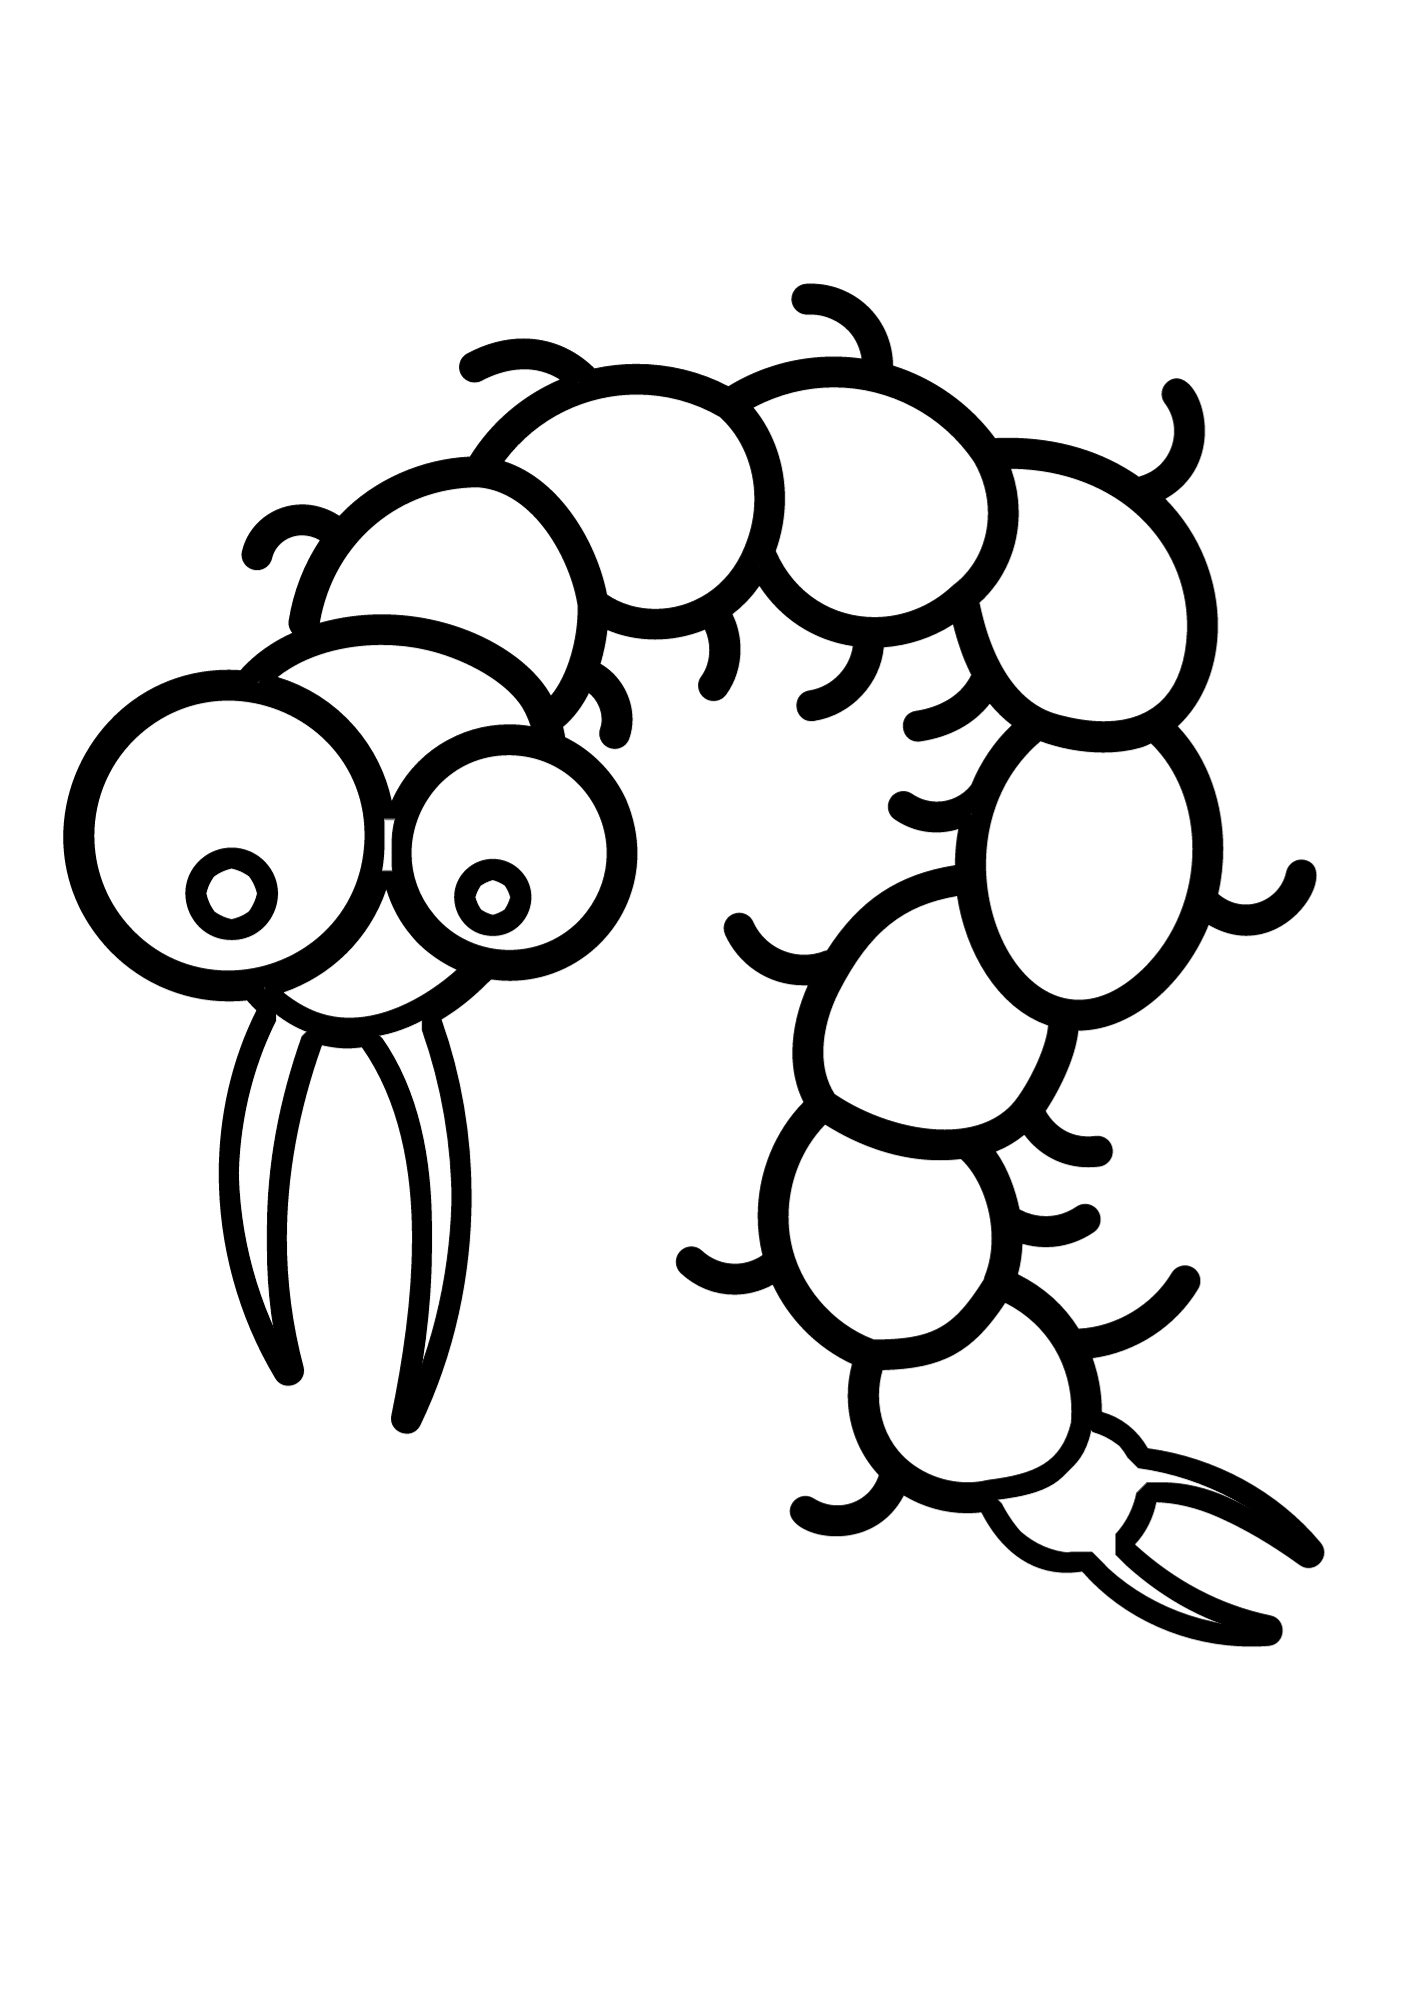 Centipede Black And White Coloring Page